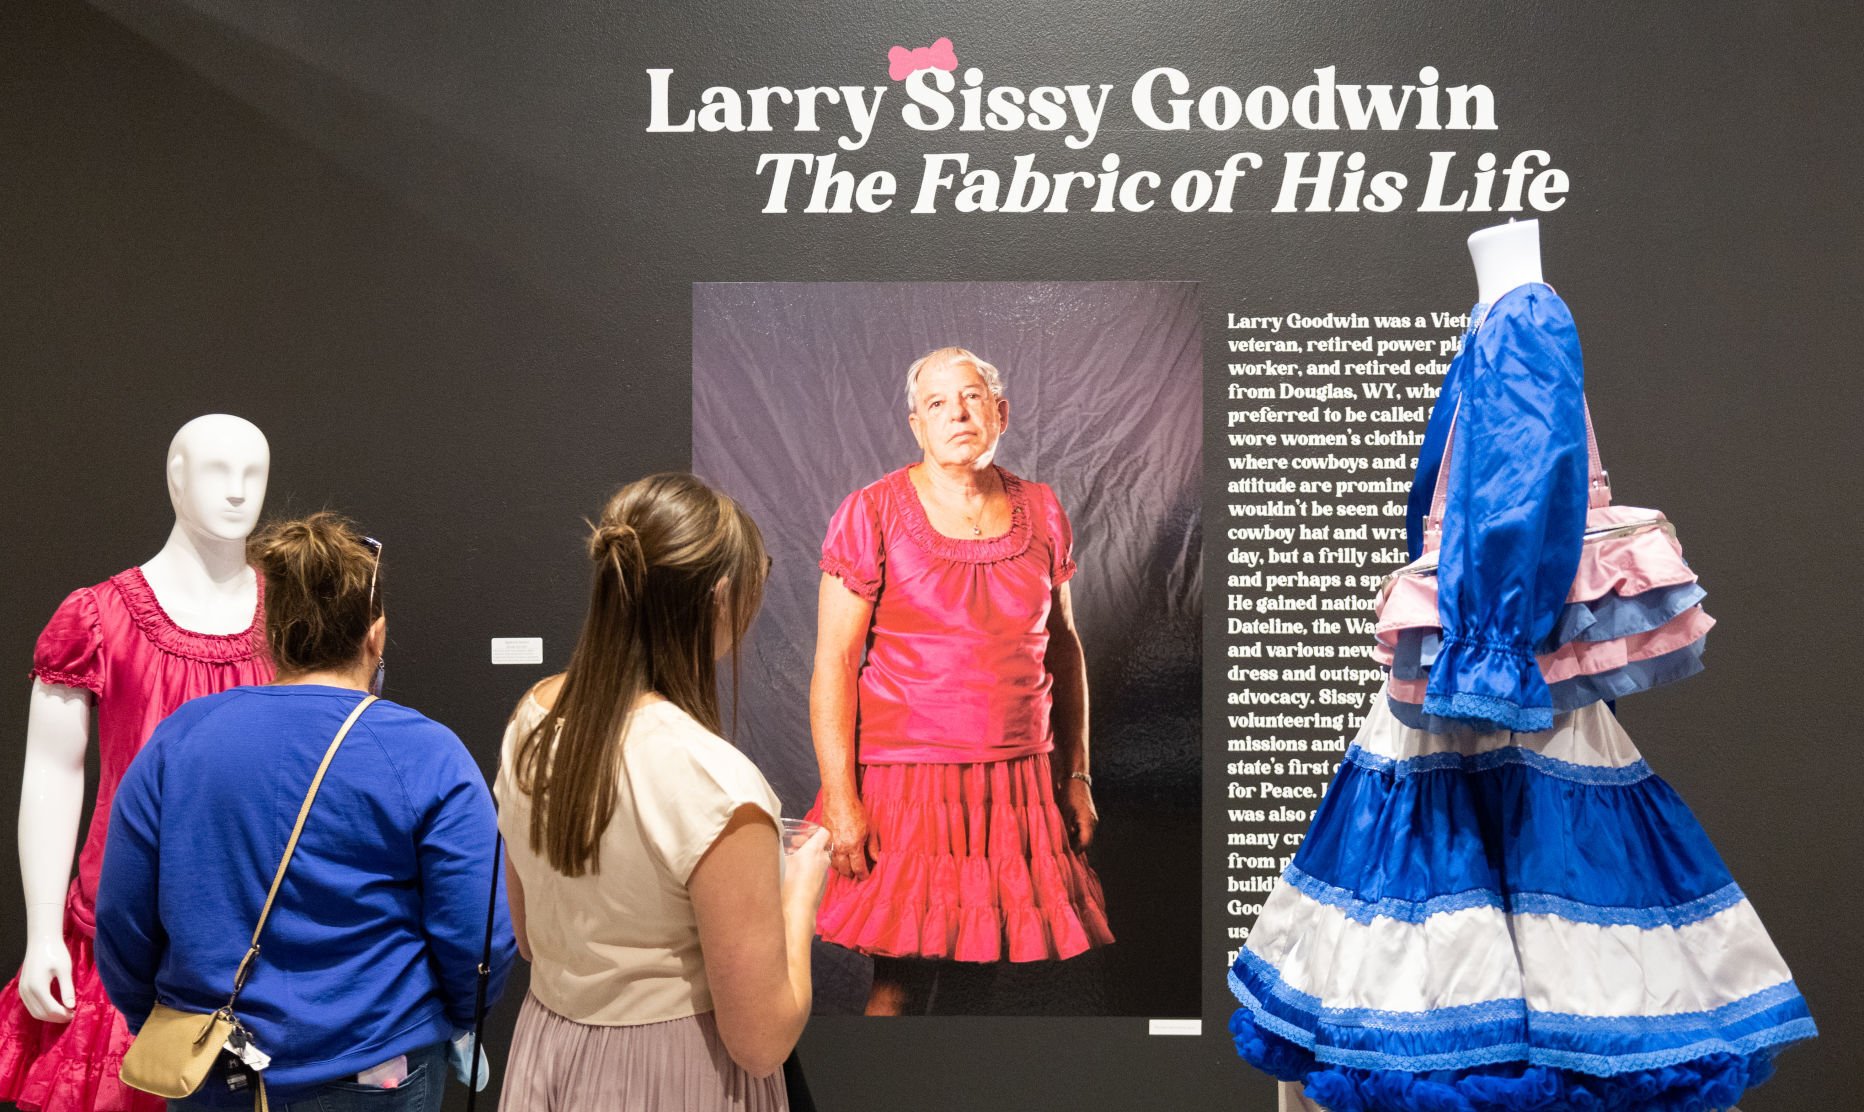 Sissy Goodwin gained national attention as a Wyoming man who wore womens clothes photo